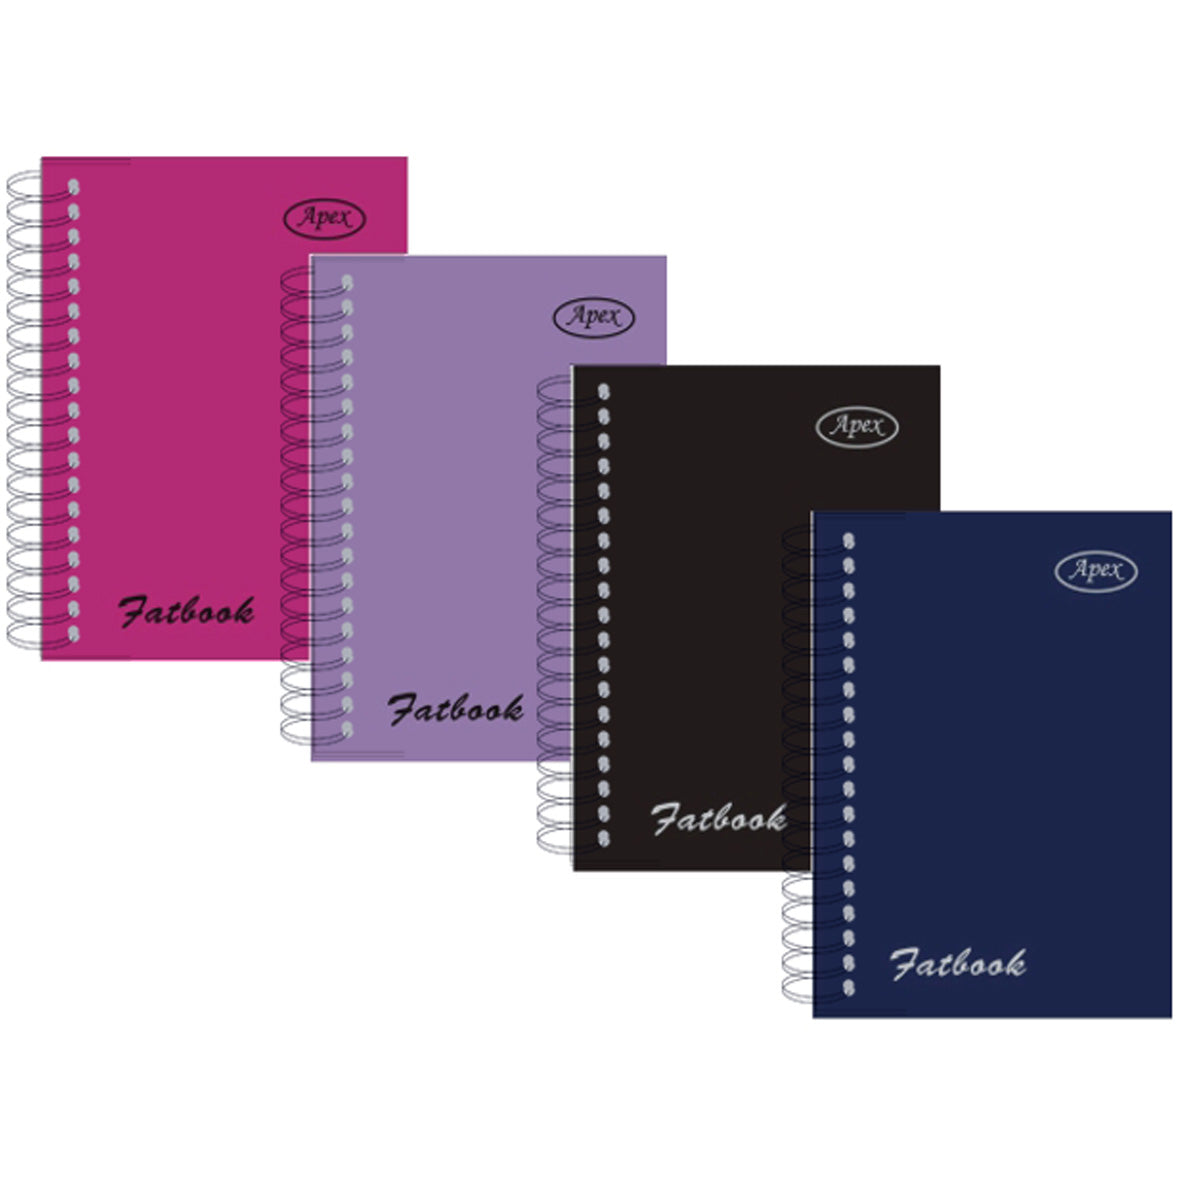 02466: Spiral Notebook 5.5x4- 200 Sheets, Assorted Colors